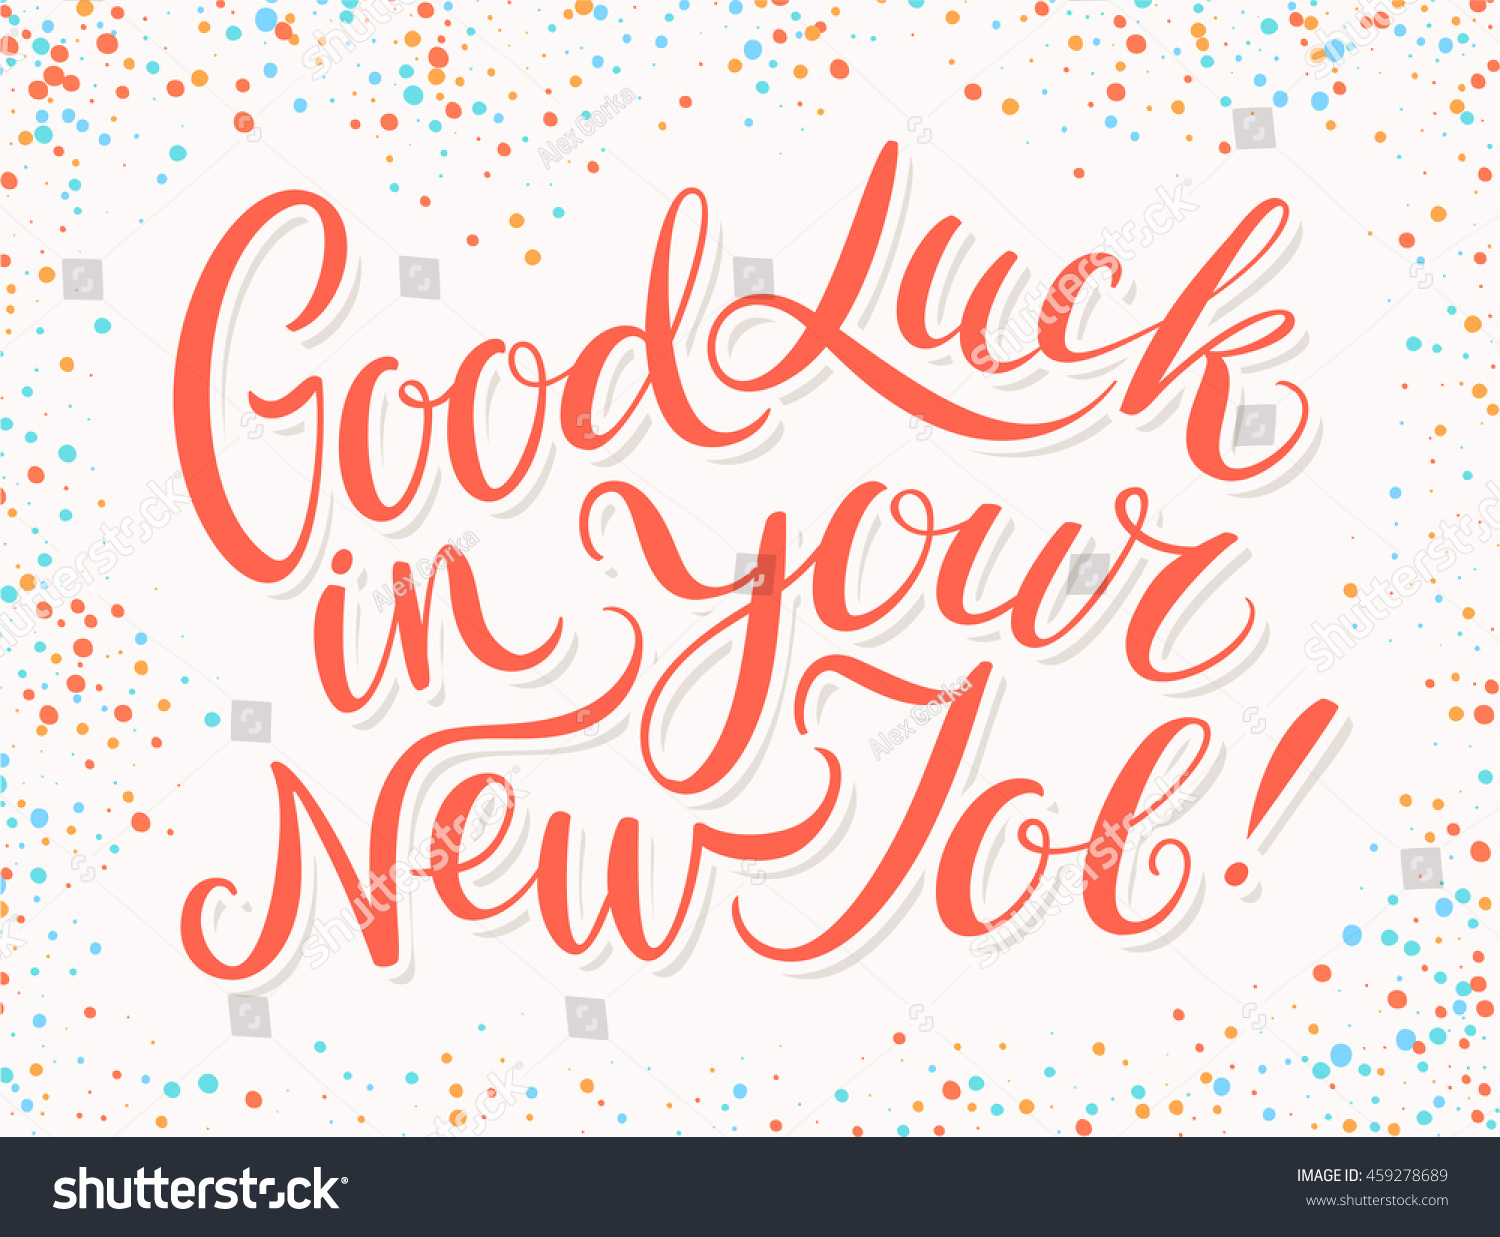 good luck your new job clipart - photo #50